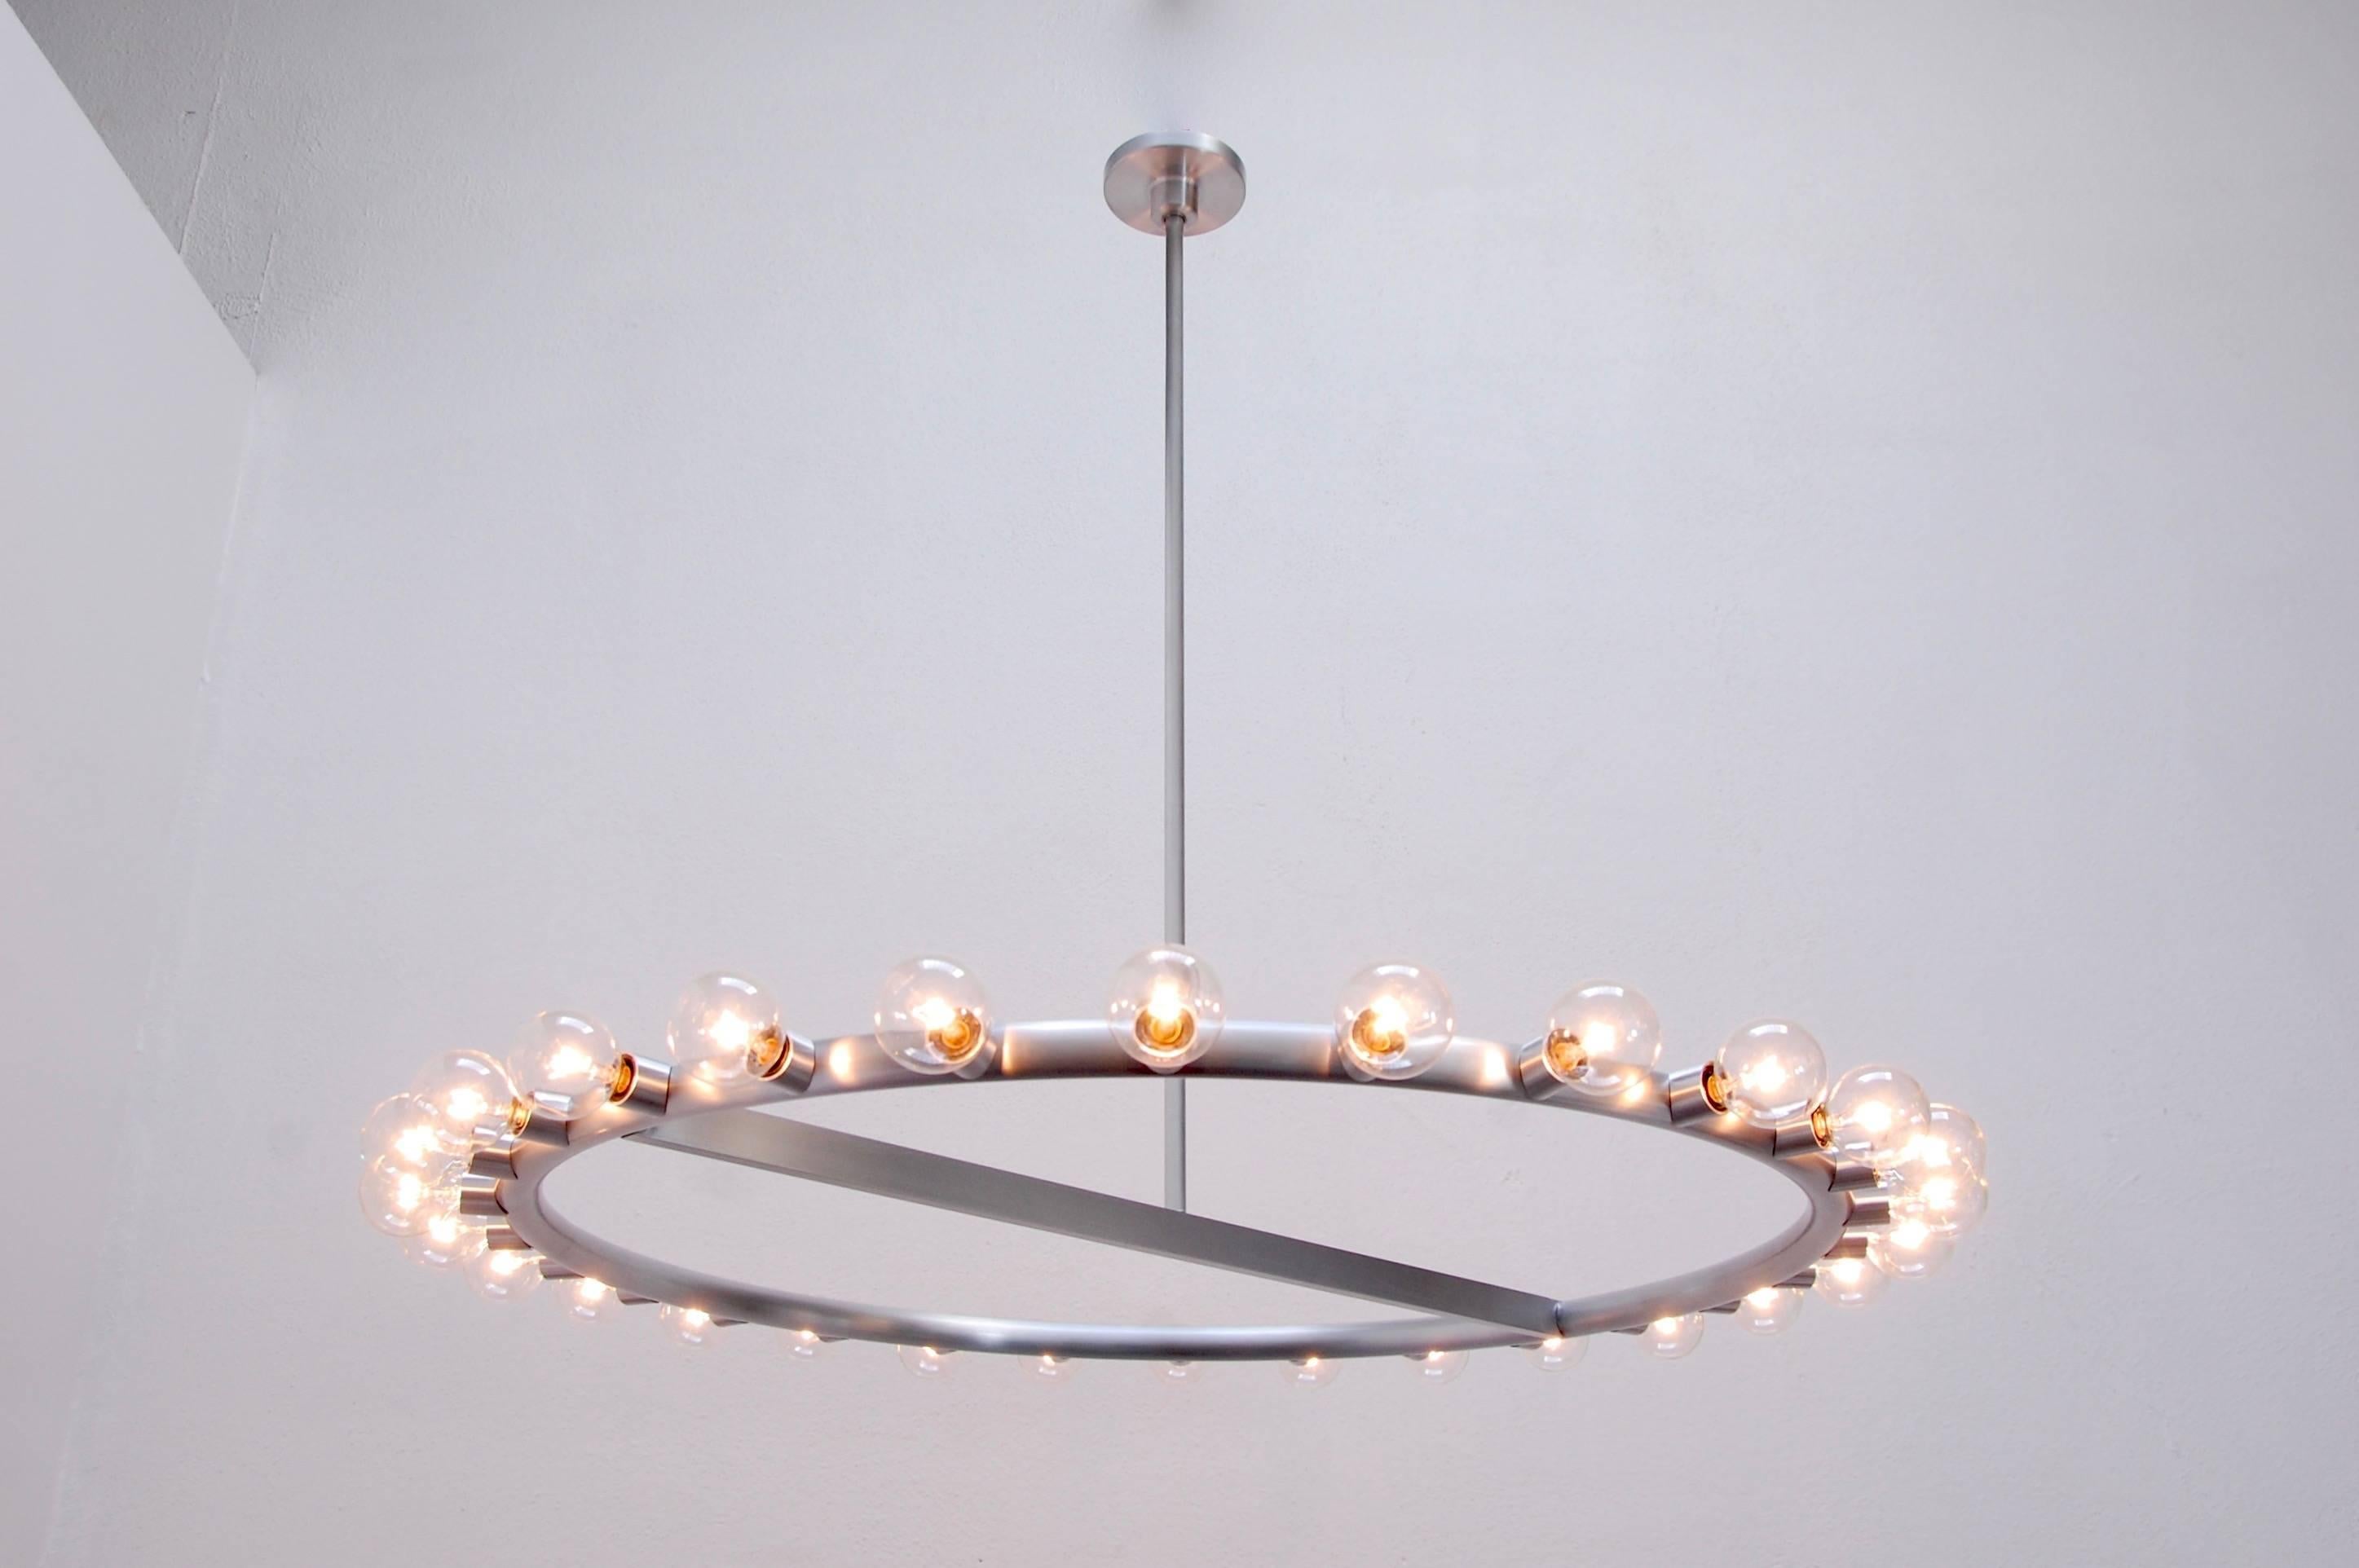 Ring of lights chandelier by Lumfardo Luminaires. 28 E12 candelabra based chandelier in satin aluminum. Part of our custom collection the Ring of Lights is made upon request. Customizable drops available.
Measures: Diameter: 30” without bulbs
35.5”